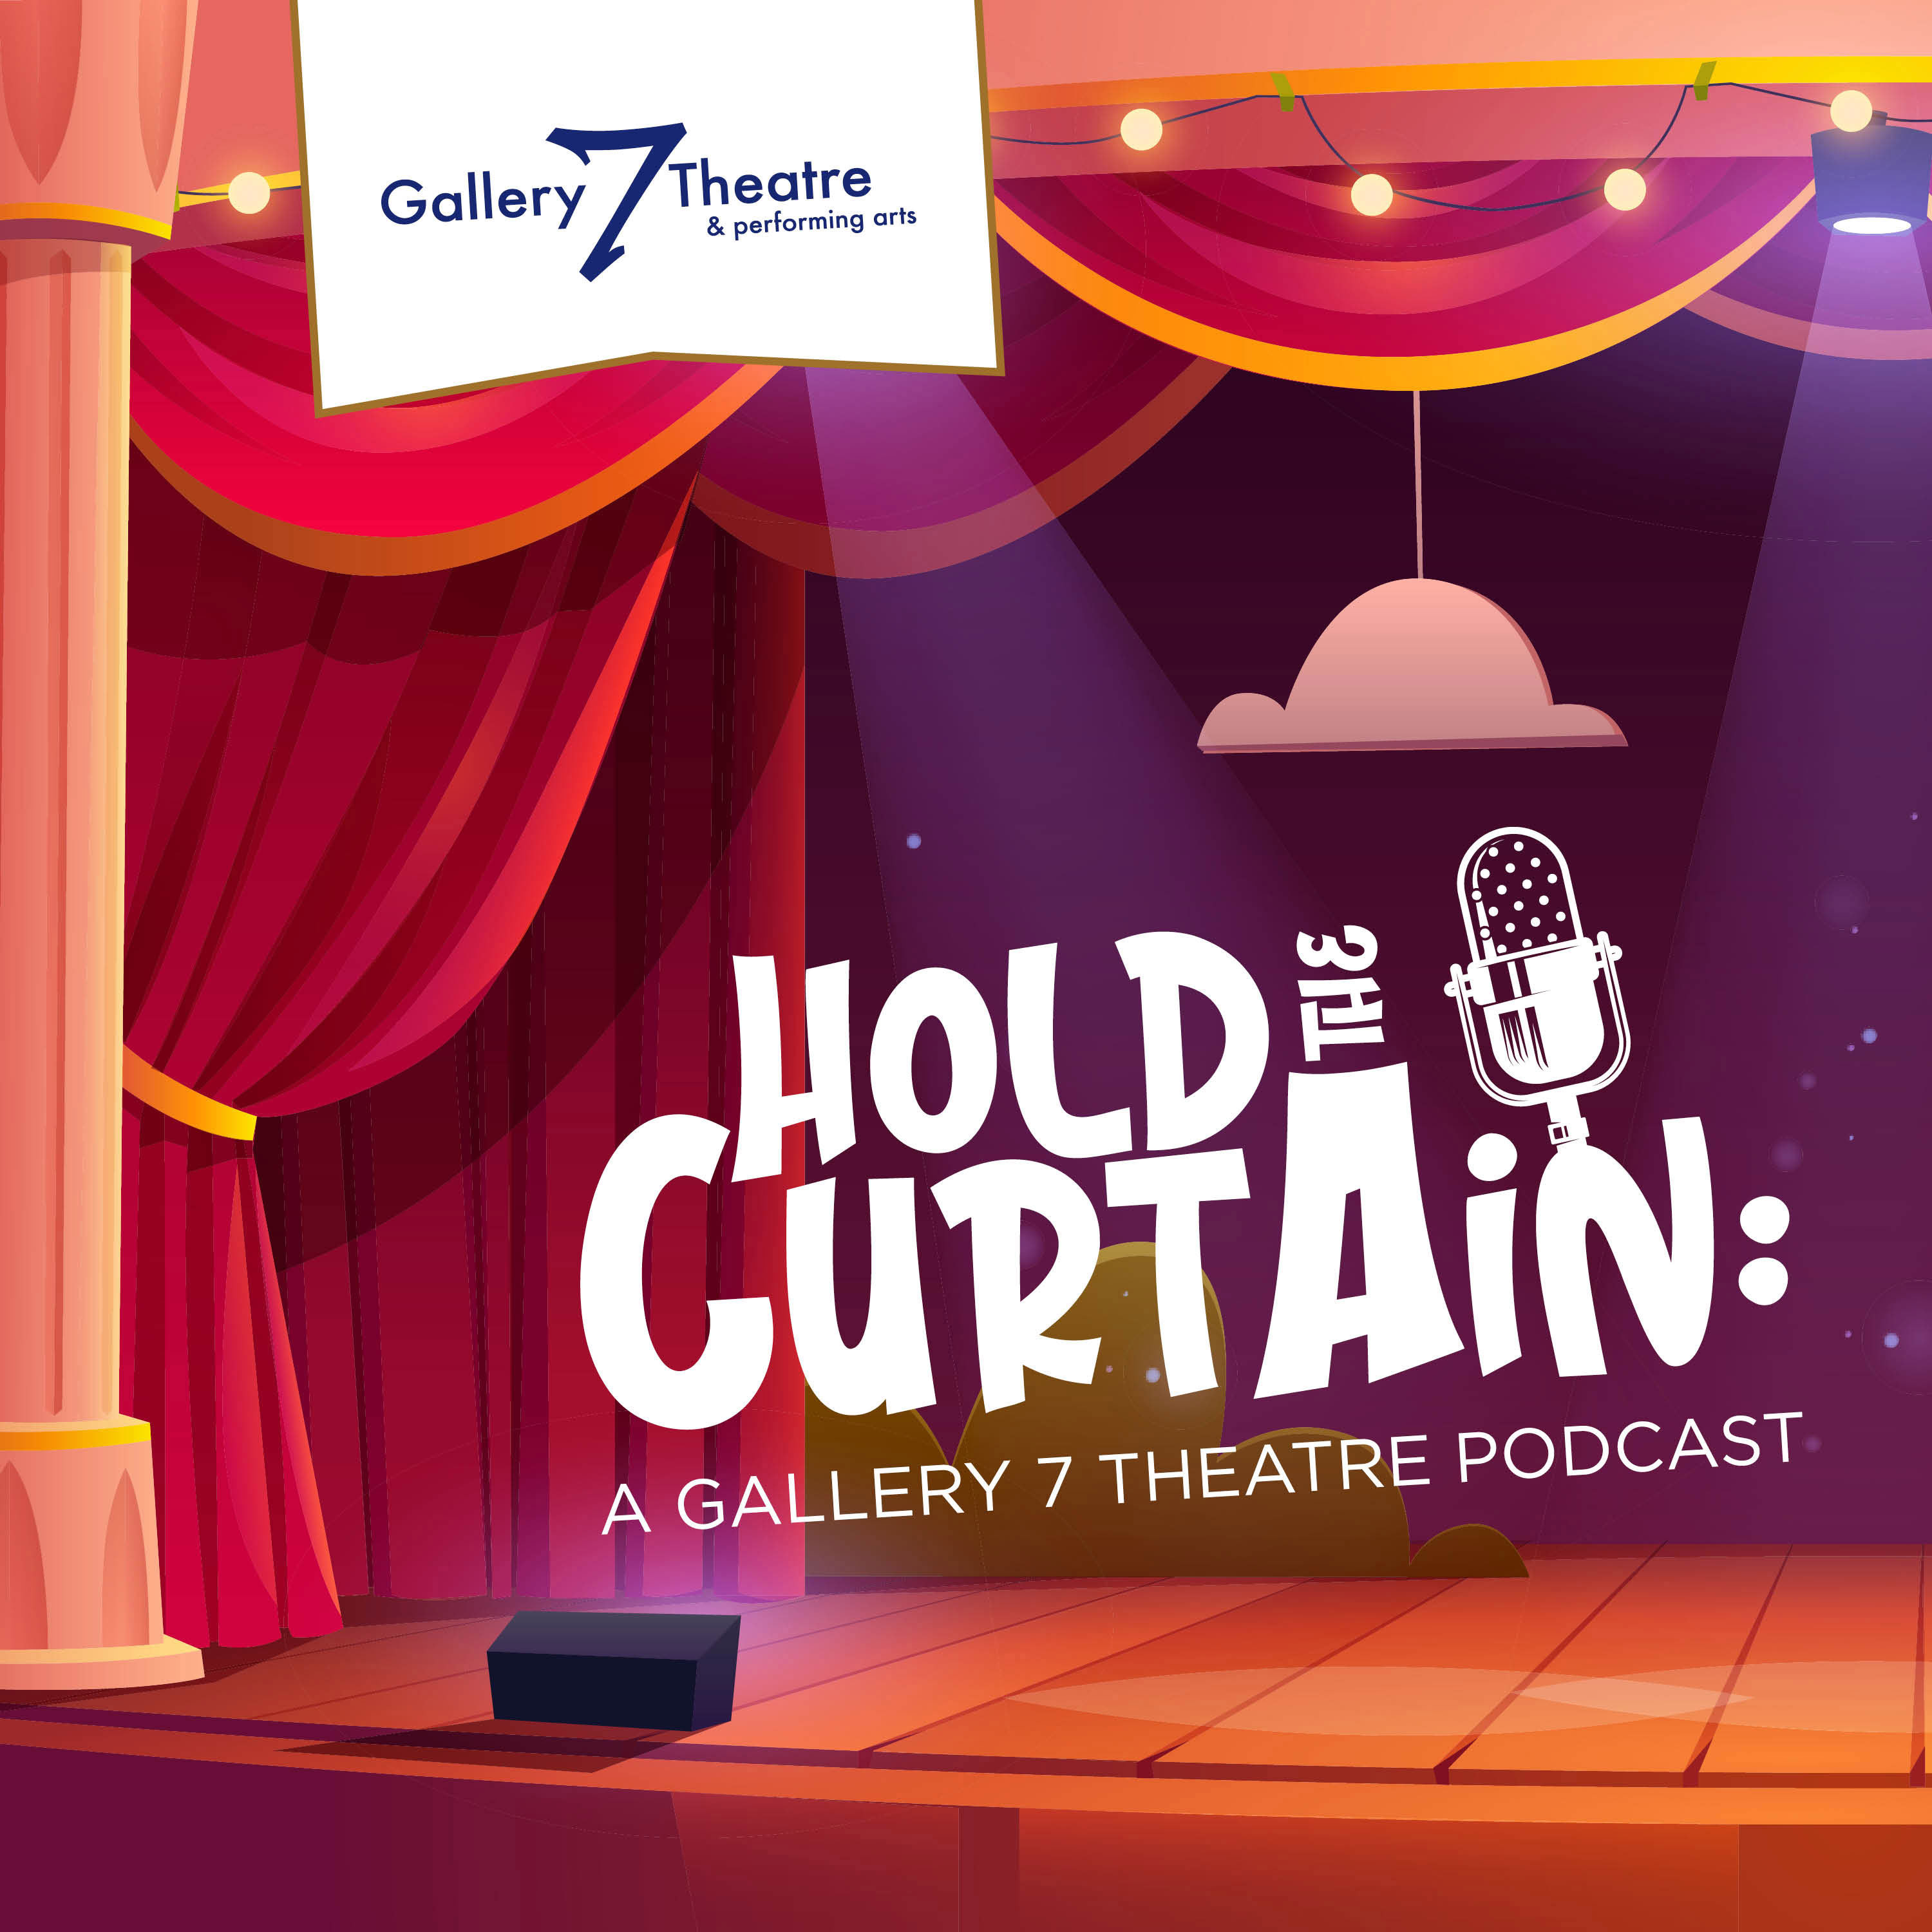 Artwork for podcast Hold the Curtain